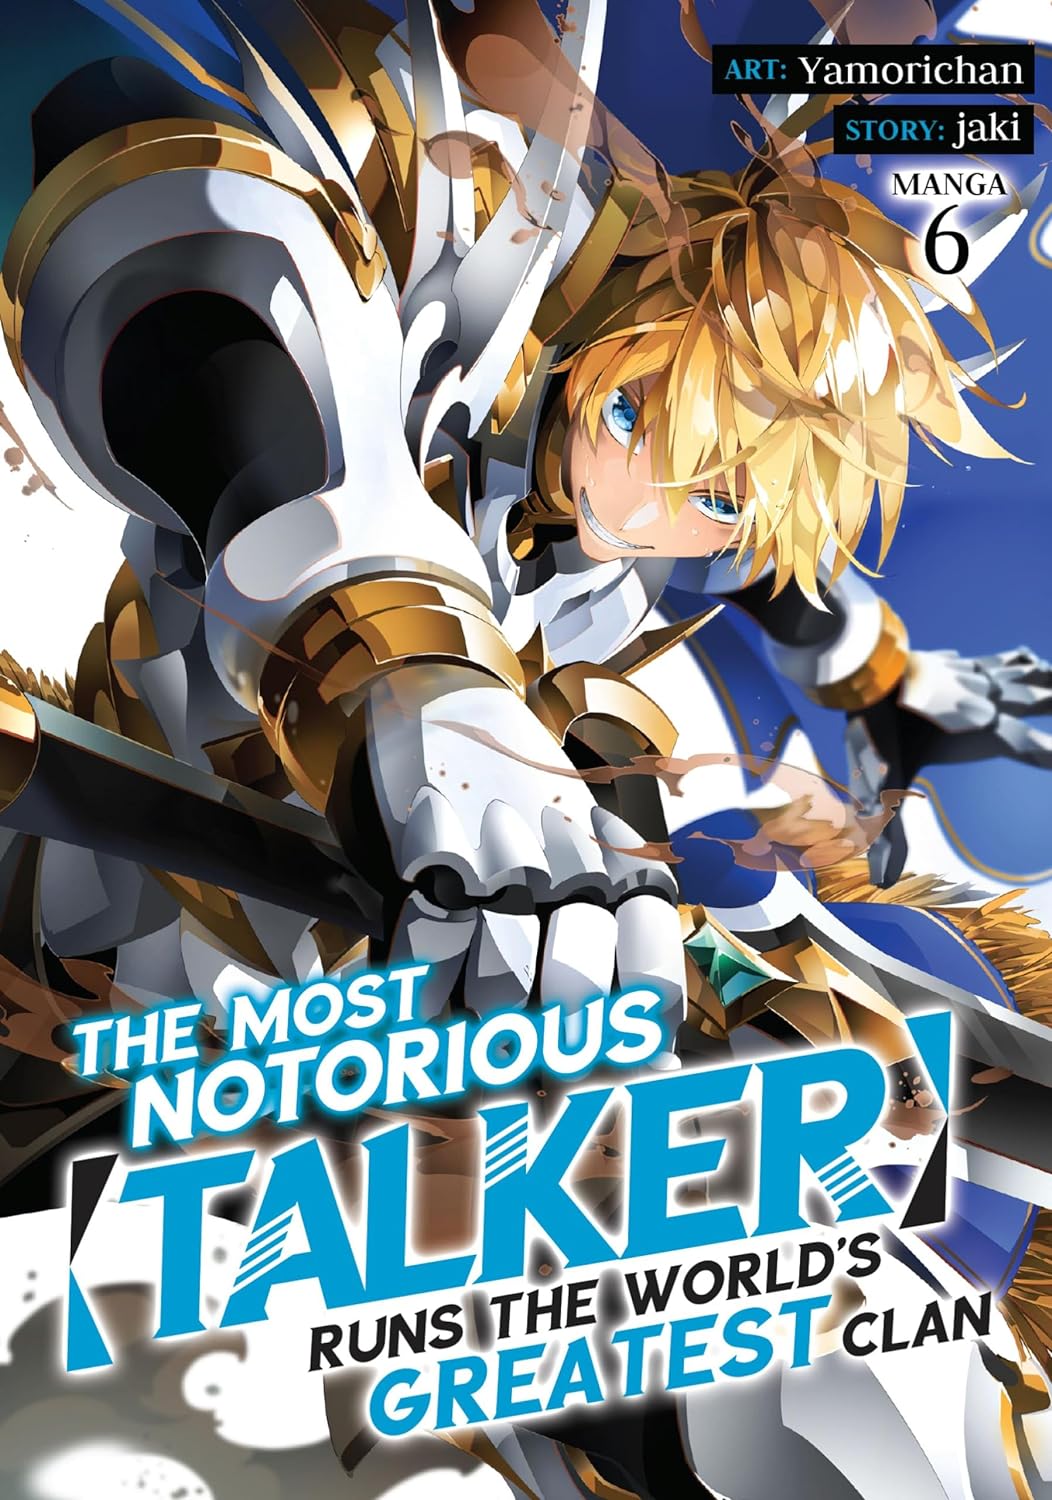 The Most Notorious Talker Runs the Worlds Greatest Clan (Manga) Vol. 06